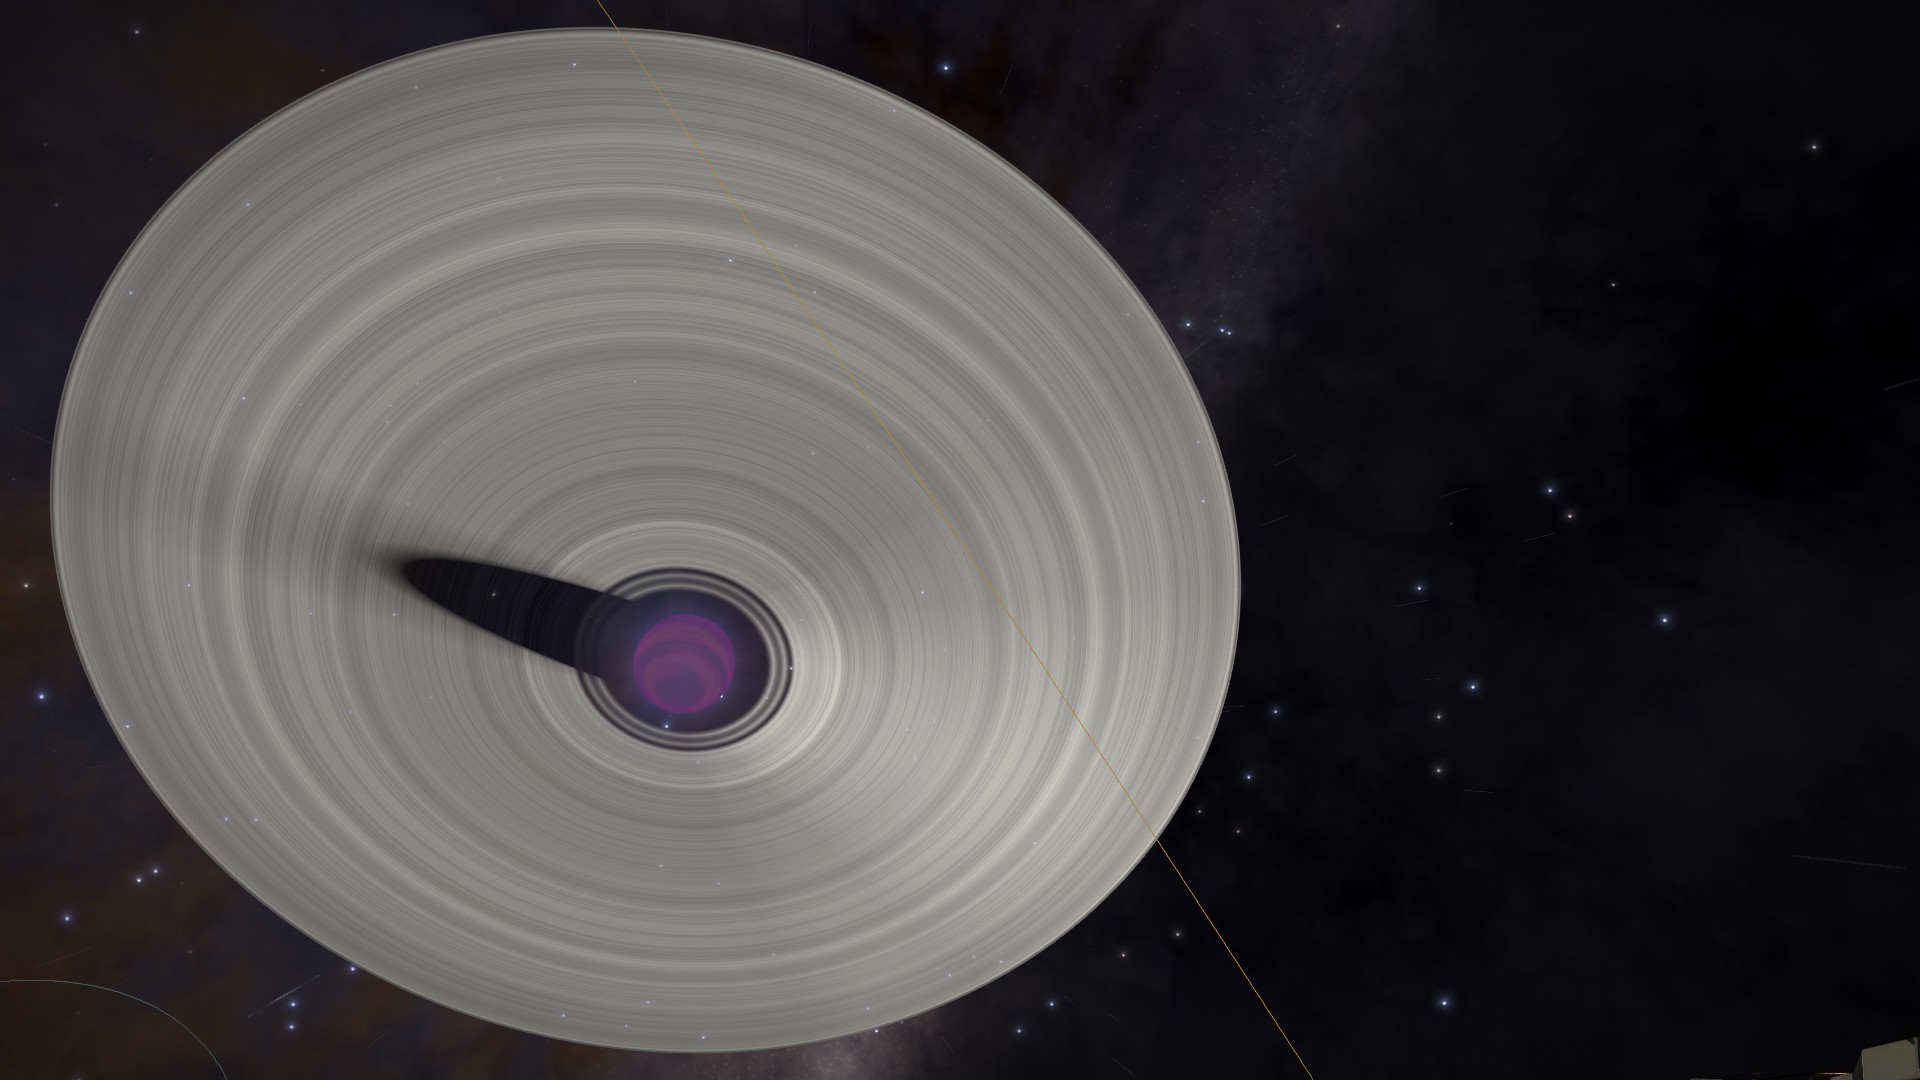 That brown dwarf with rings